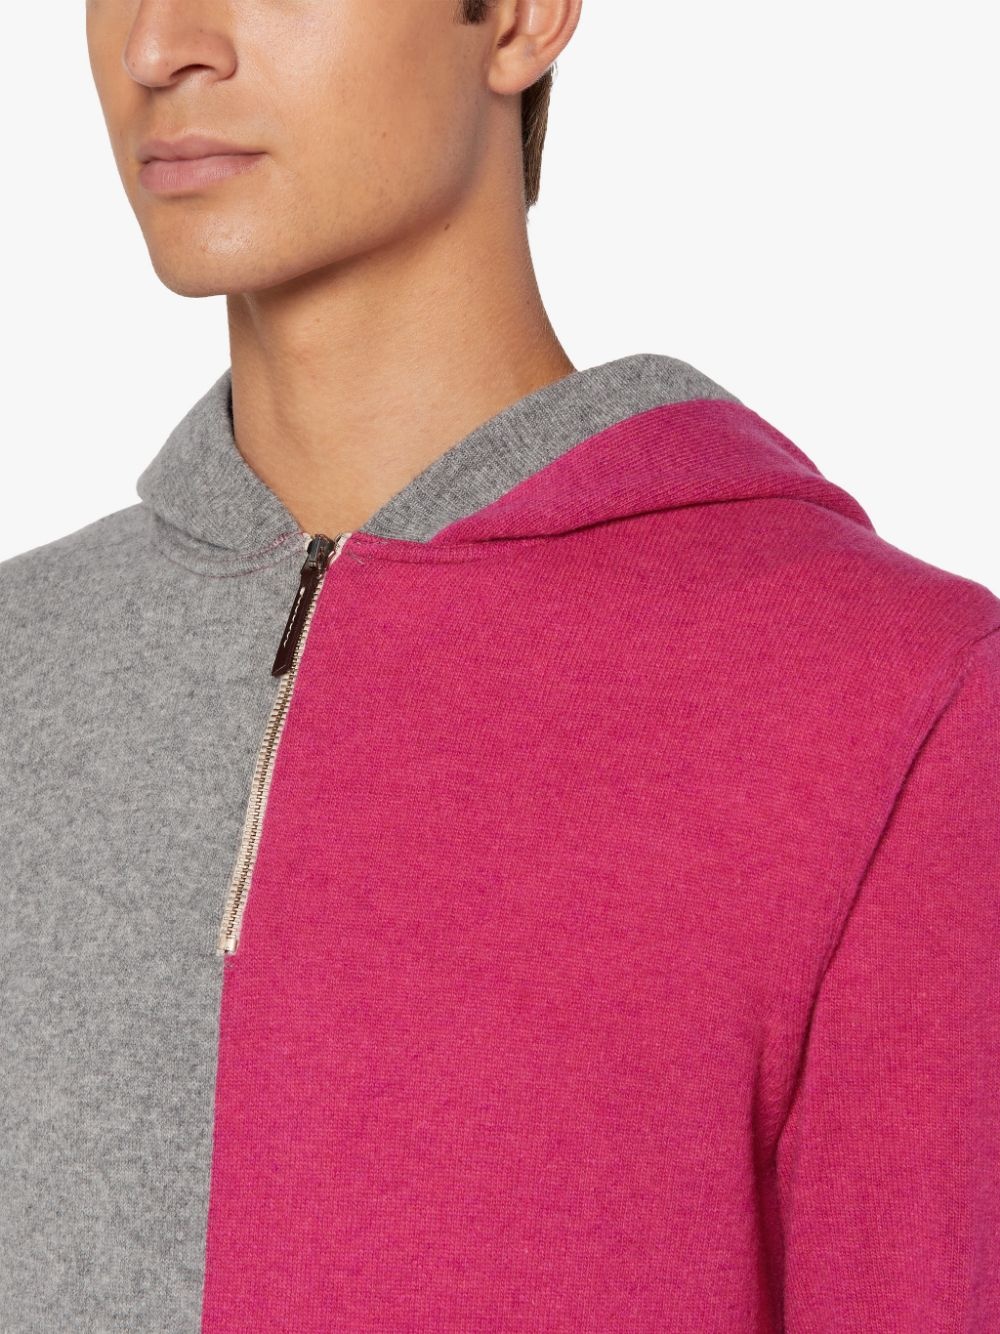 DOUBLE AGENT PINK WOOL HOODED SWEATER | GKM-201 - 5